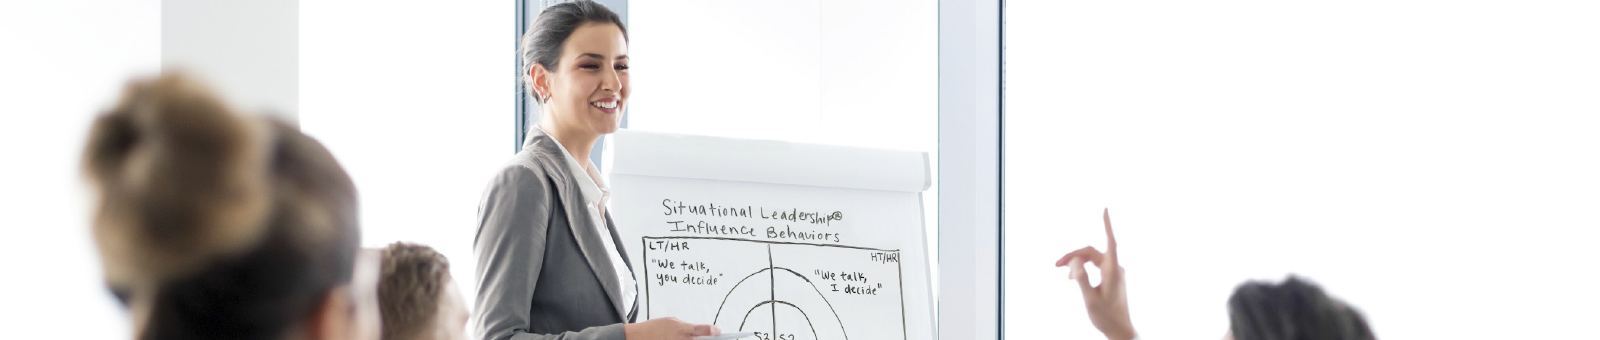 Horizontal image of woman smiling while standing next to drawn situational leadership model and looking at someone raising their hand